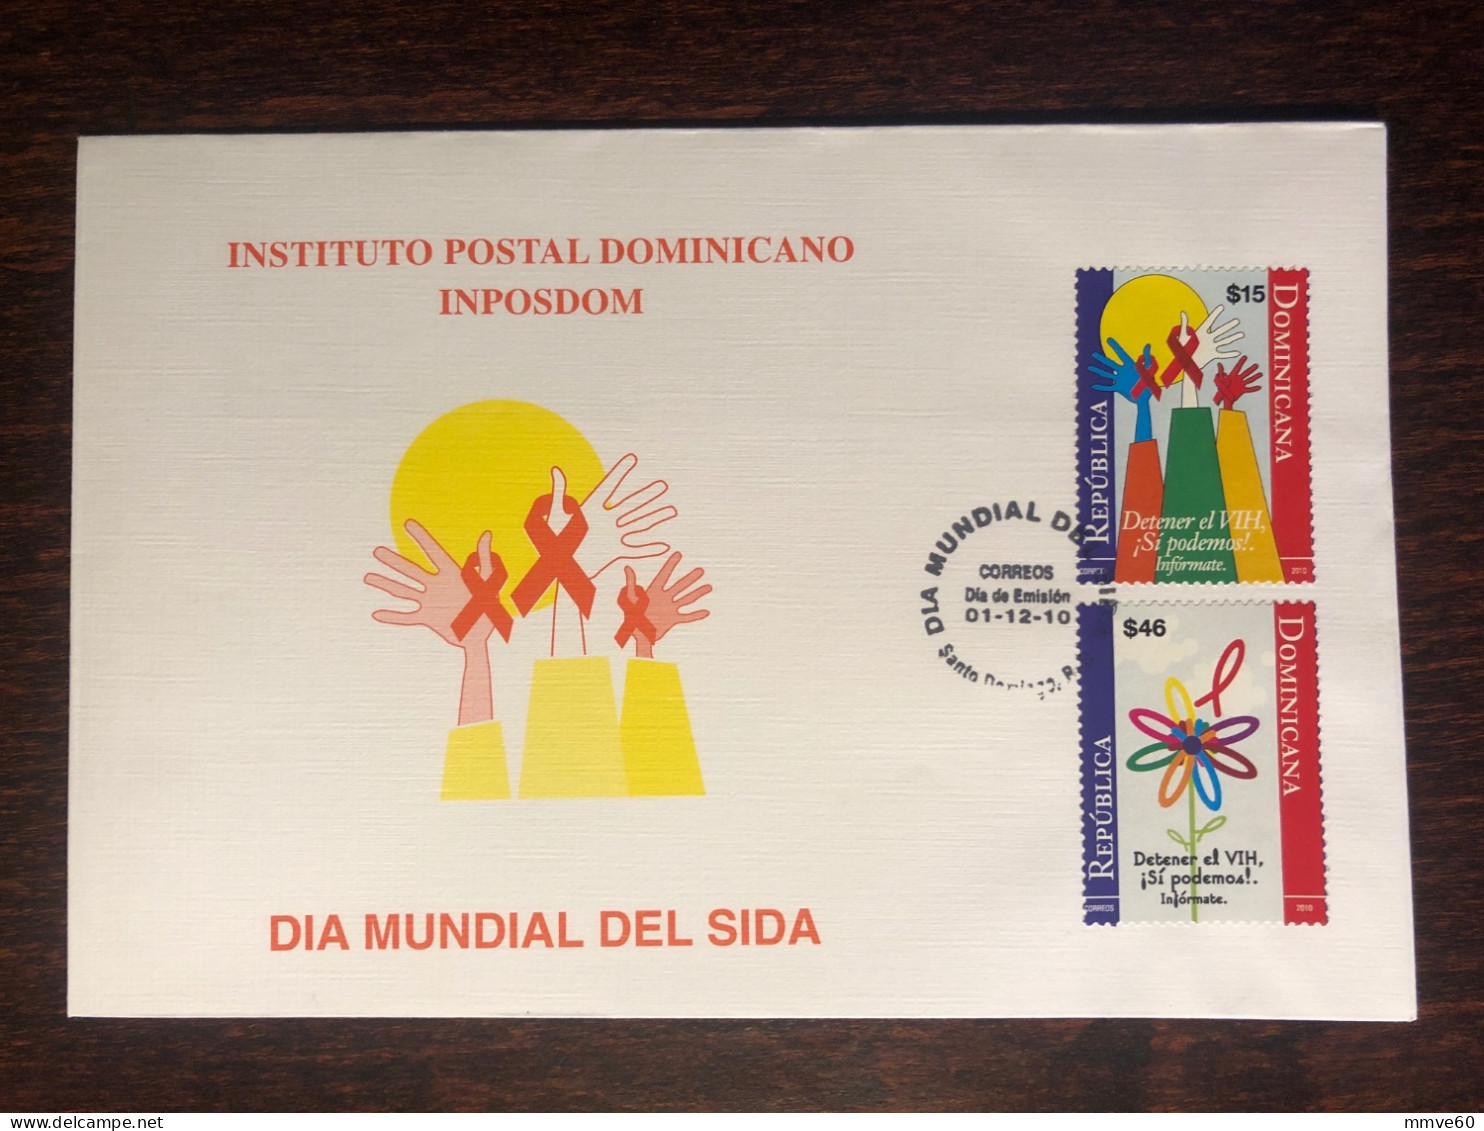 DOMINICAN FDC COVER 2010 YEAR AIDS SIDA  HEALTH MEDICINE STAMPS - Dominican Republic